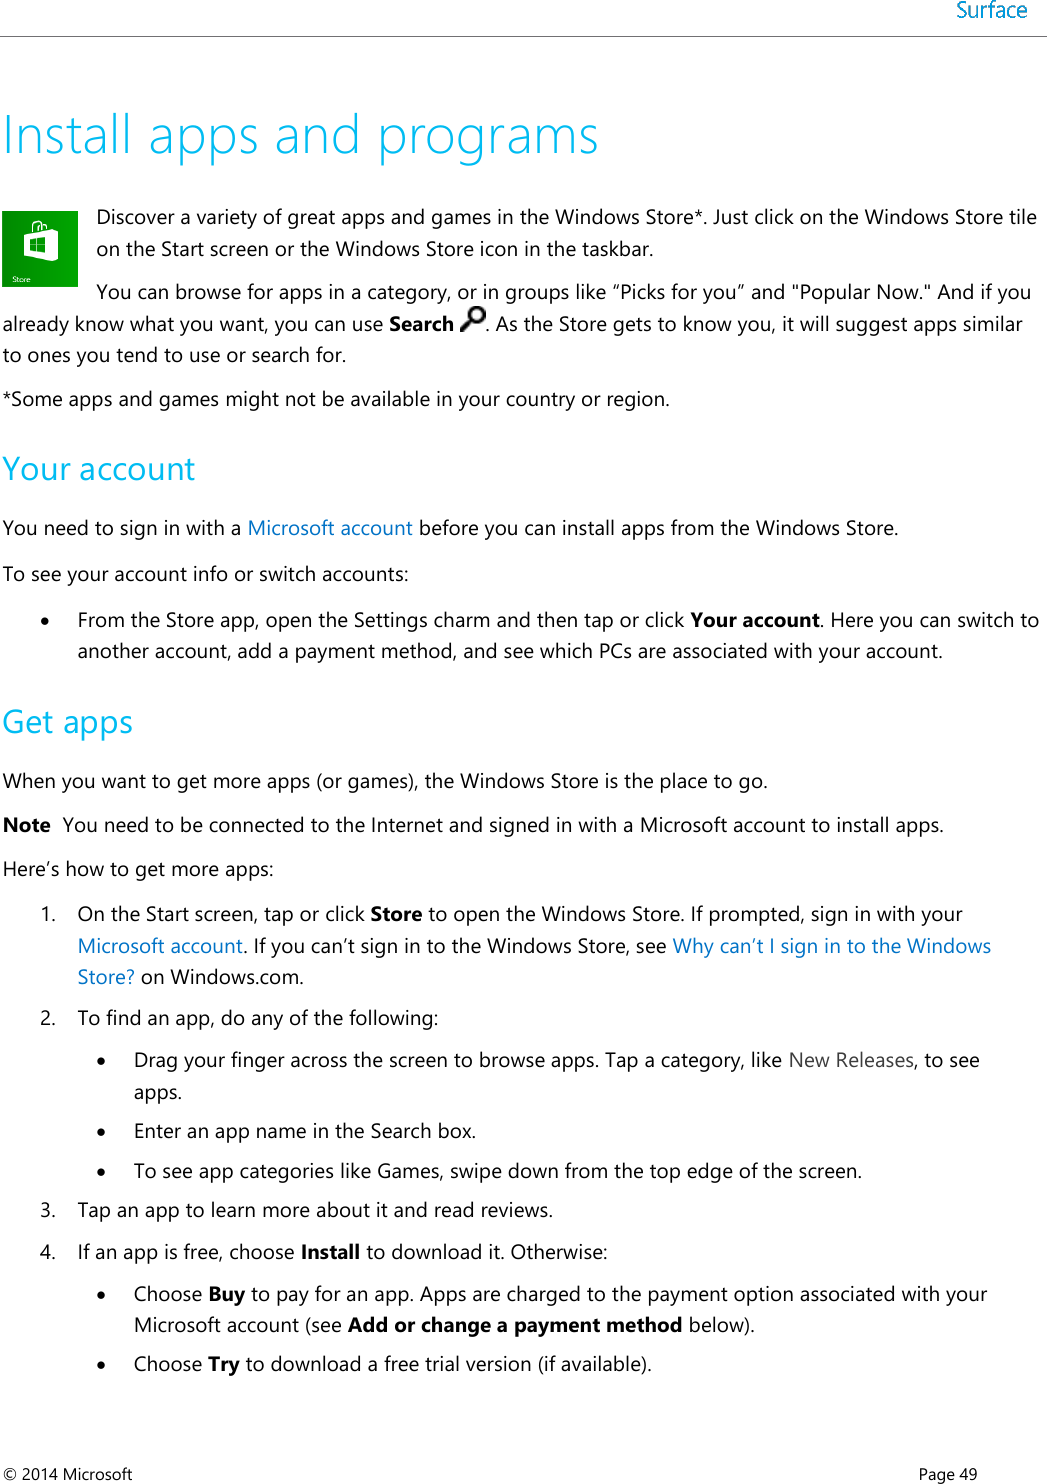  © 2014 Microsoft      Page 49  Install apps and programs Discover a variety of great apps and games in the Windows Store*. Just click on the Windows Store tile on the Start screen or the Windows Store icon in the taskbar. You can browse for apps in a category, or in groups like “Picks for you” and &quot;Popular Now.&quot; And if you already know what you want, you can use Search . As the Store gets to know you, it will suggest apps similar to ones you tend to use or search for. *Some apps and games might not be available in your country or region. Your account You need to sign in with a Microsoft account before you can install apps from the Windows Store.  To see your account info or switch accounts:  From the Store app, open the Settings charm and then tap or click Your account. Here you can switch to another account, add a payment method, and see which PCs are associated with your account.  Get apps  When you want to get more apps (or games), the Windows Store is the place to go.  Note  You need to be connected to the Internet and signed in with a Microsoft account to install apps. Here’s how to get more apps: 1. On the Start screen, tap or click Store to open the Windows Store. If prompted, sign in with your Microsoft account. If you can’t sign in to the Windows Store, see Why can’t I sign in to the Windows Store? on Windows.com. 2. To find an app, do any of the following:   Drag your finger across the screen to browse apps. Tap a category, like New Releases, to see apps.  Enter an app name in the Search box.  To see app categories like Games, swipe down from the top edge of the screen. 3. Tap an app to learn more about it and read reviews.  4. If an app is free, choose Install to download it. Otherwise:   Choose Buy to pay for an app. Apps are charged to the payment option associated with your Microsoft account (see Add or change a payment method below).  Choose Try to download a free trial version (if available). 